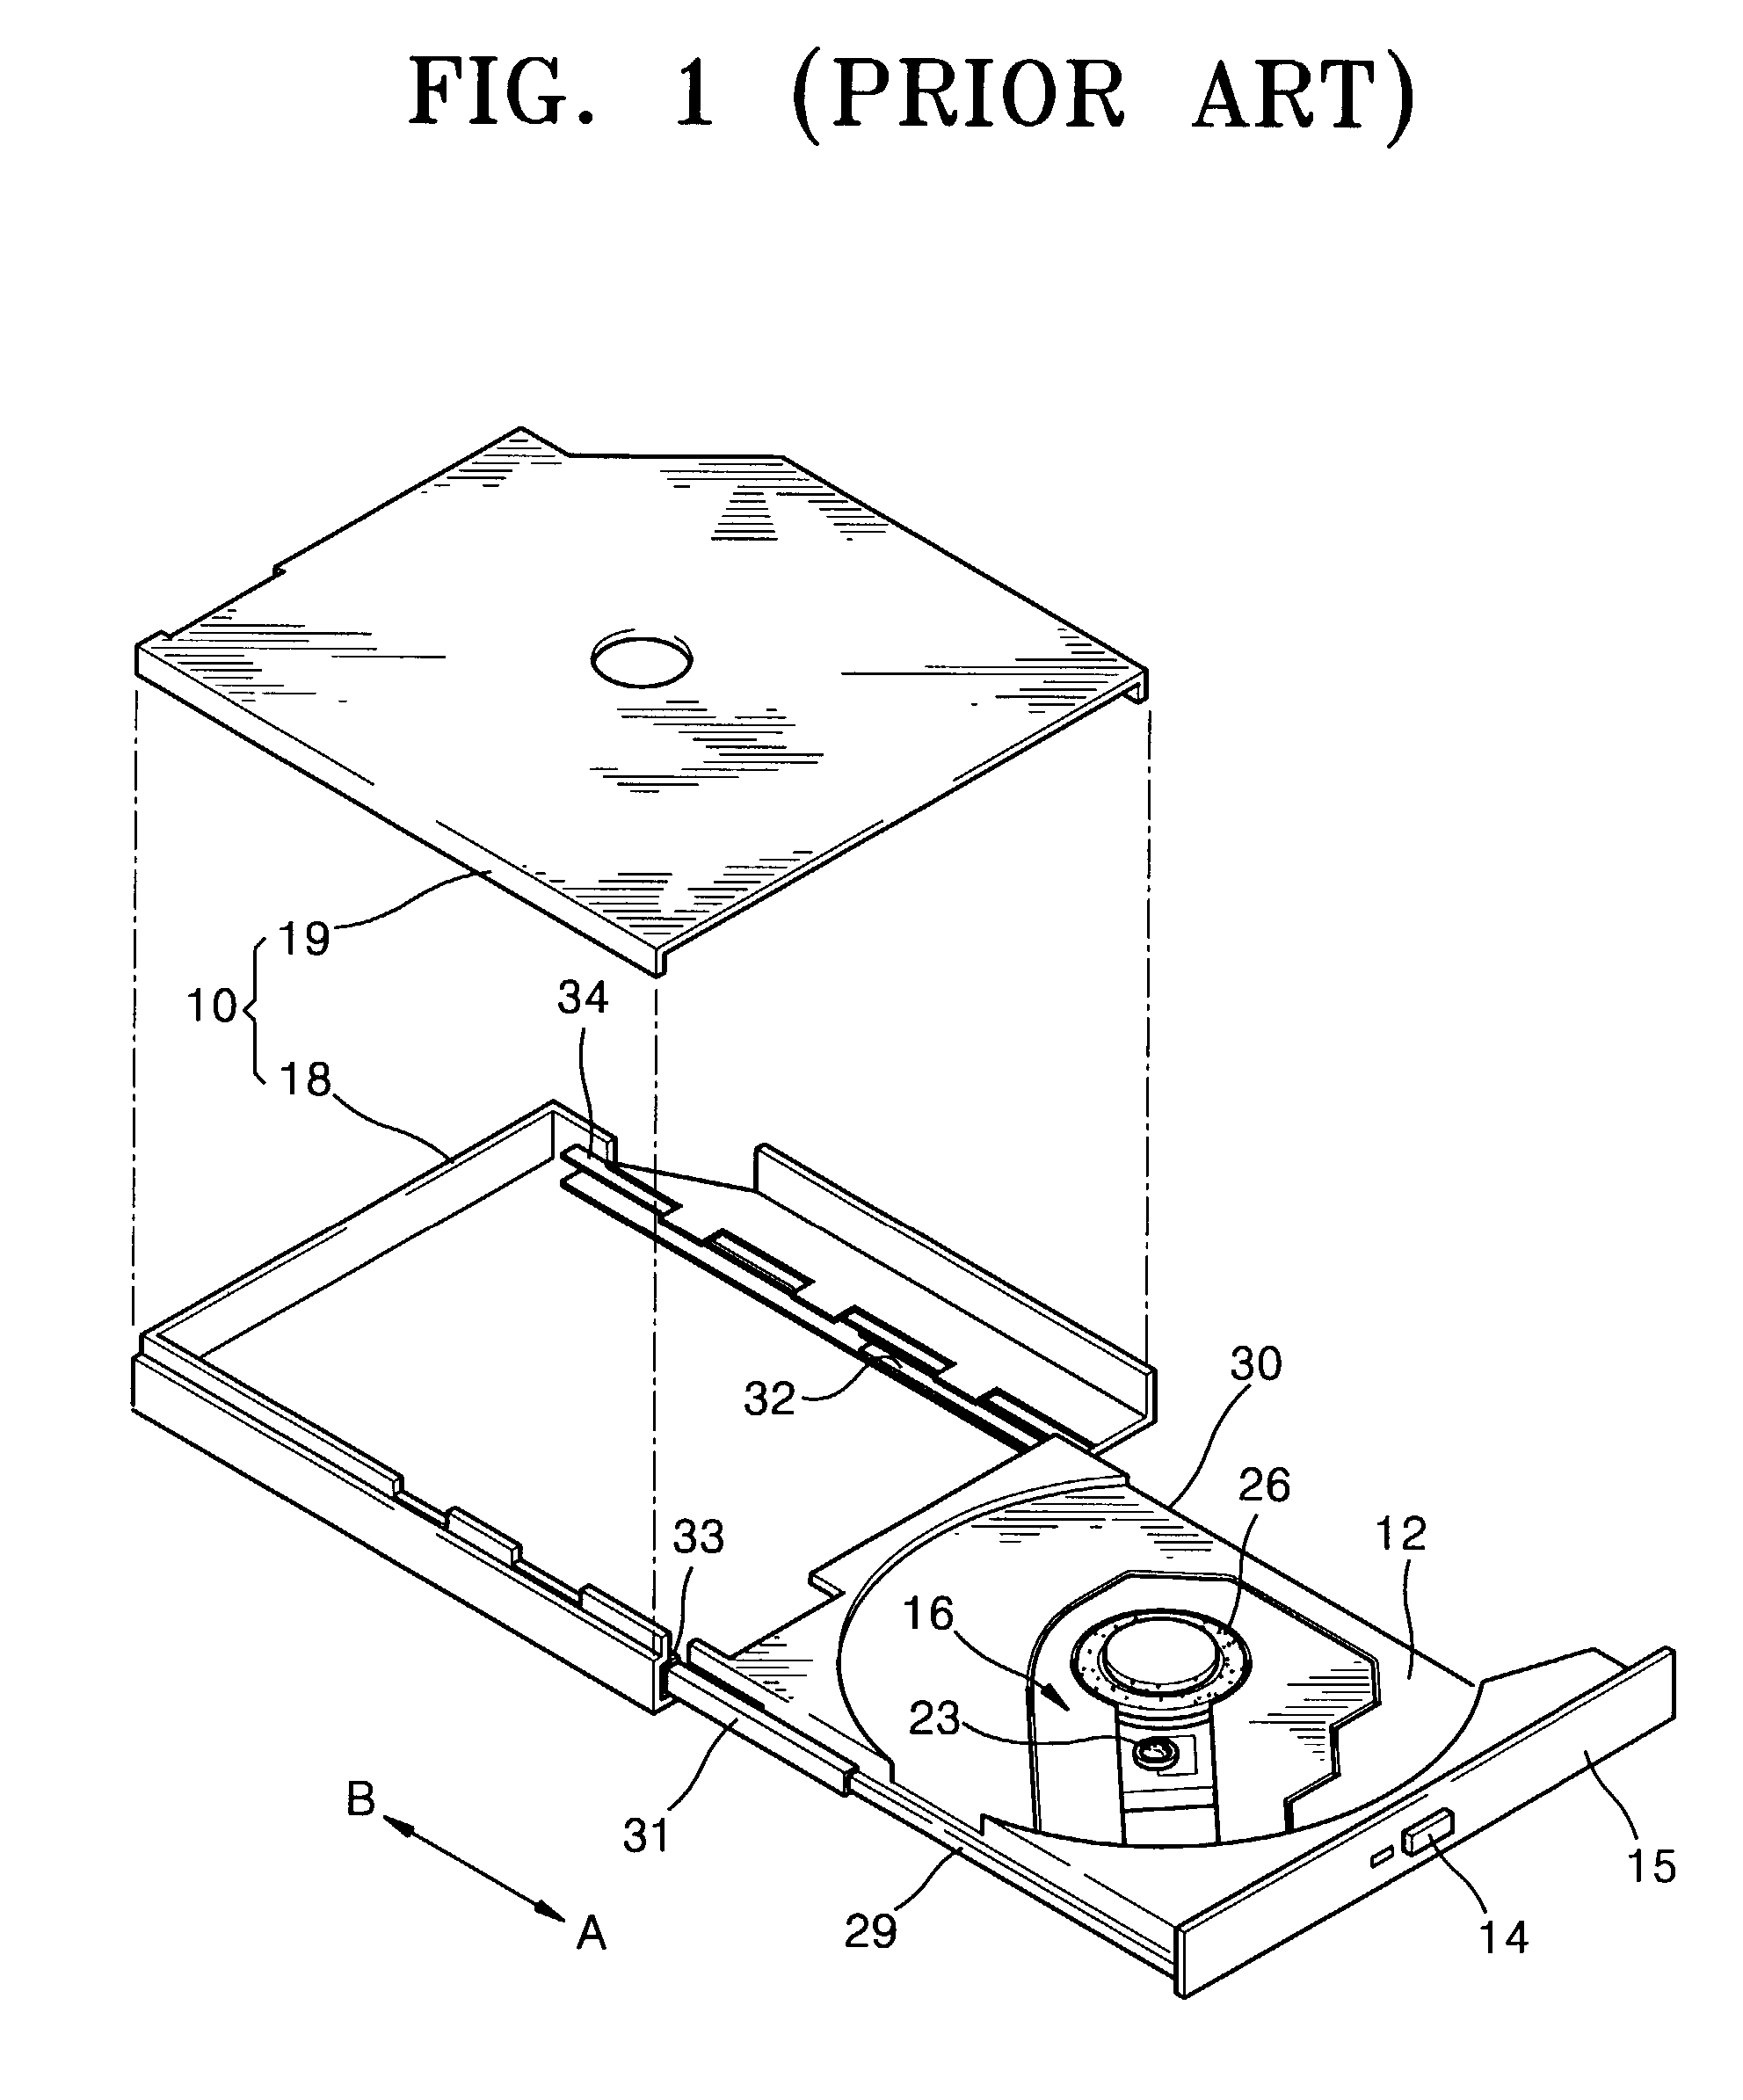 Tray guide mechanism for an optical disc drive